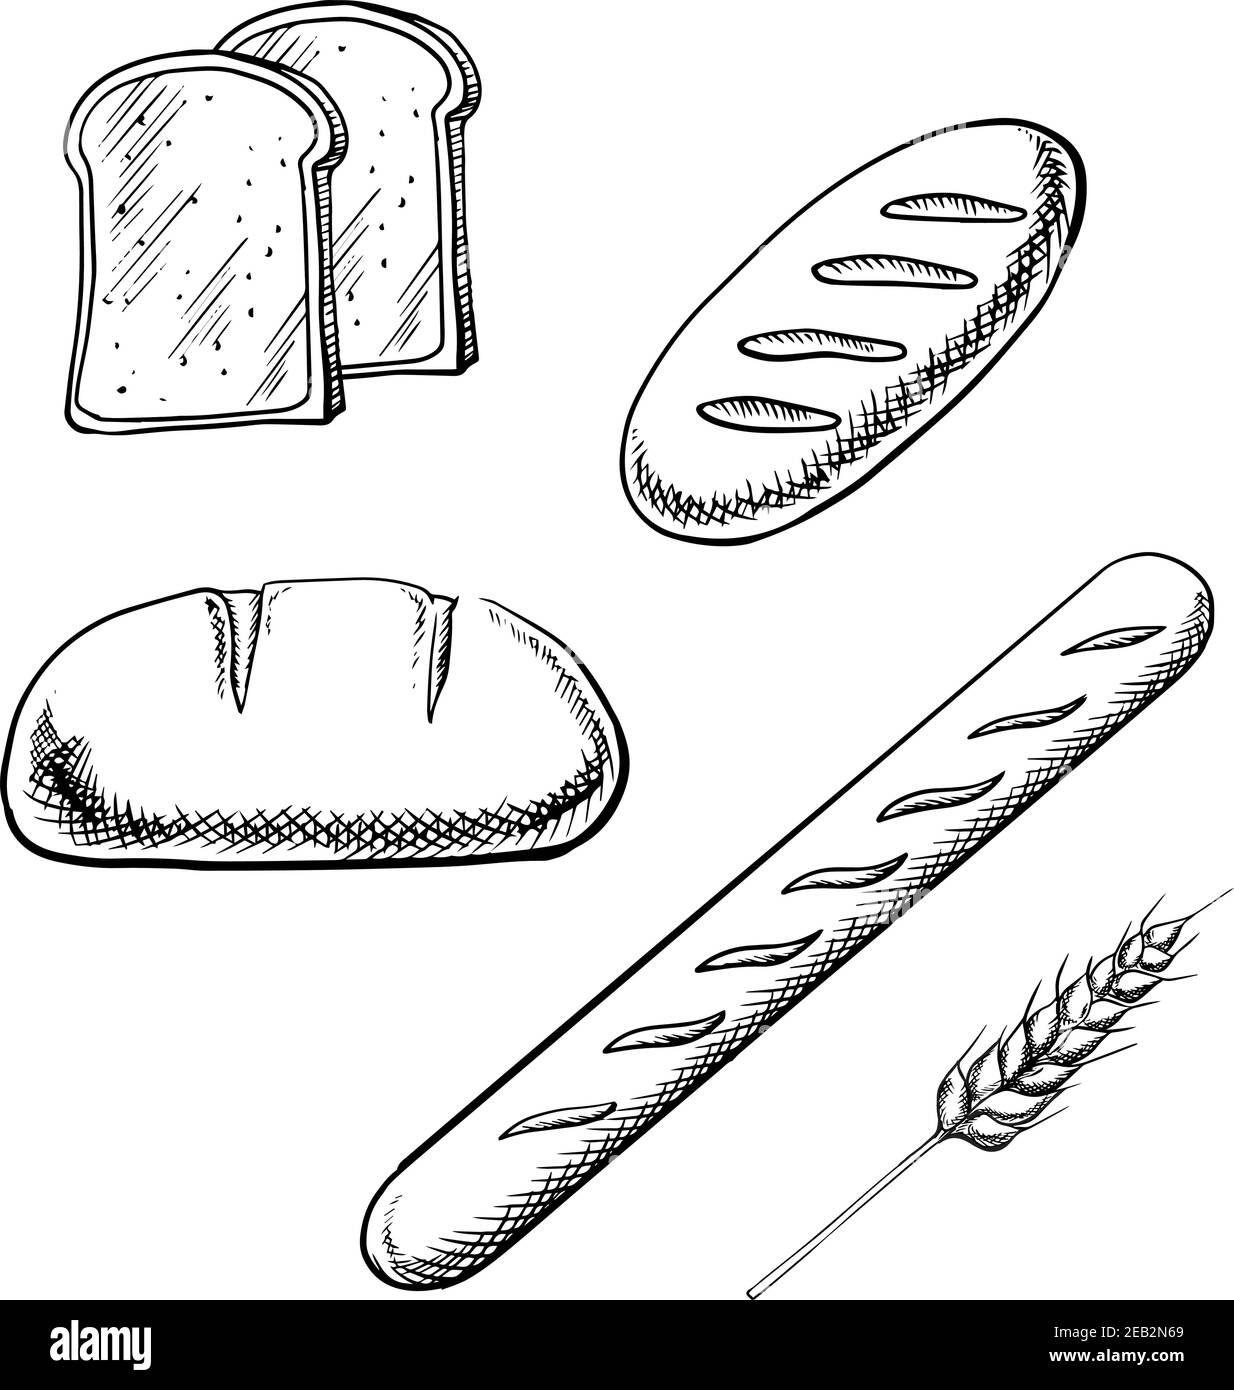 Animated Loaf Coloring Page for Toddlers